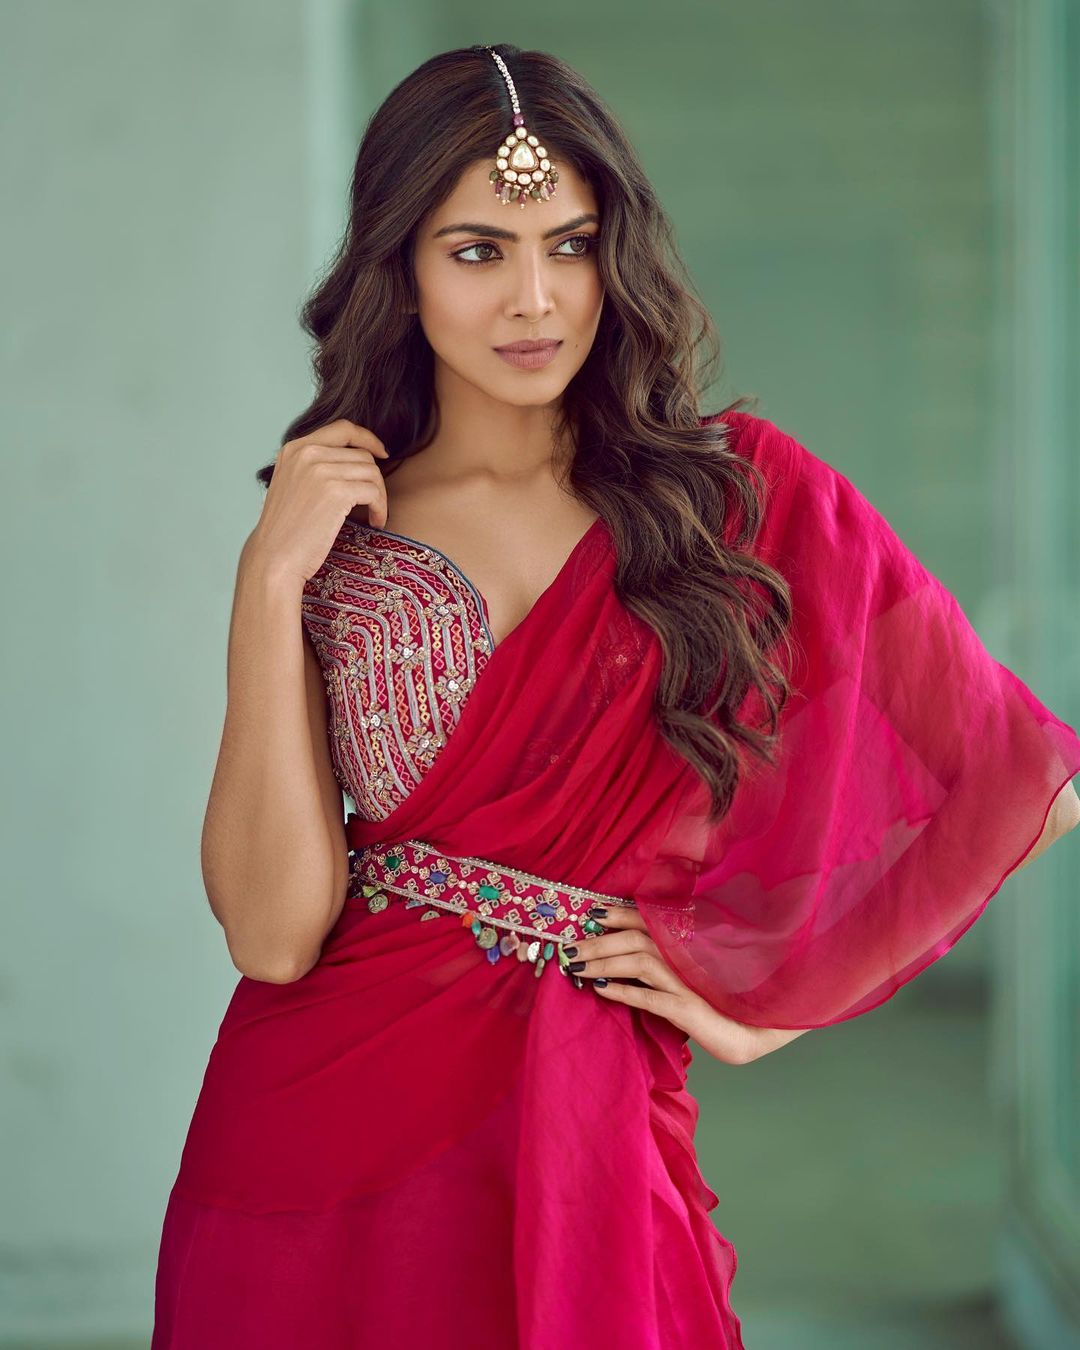 Malavika Mohanan stuns in the pink saree with the embroidered blouse.